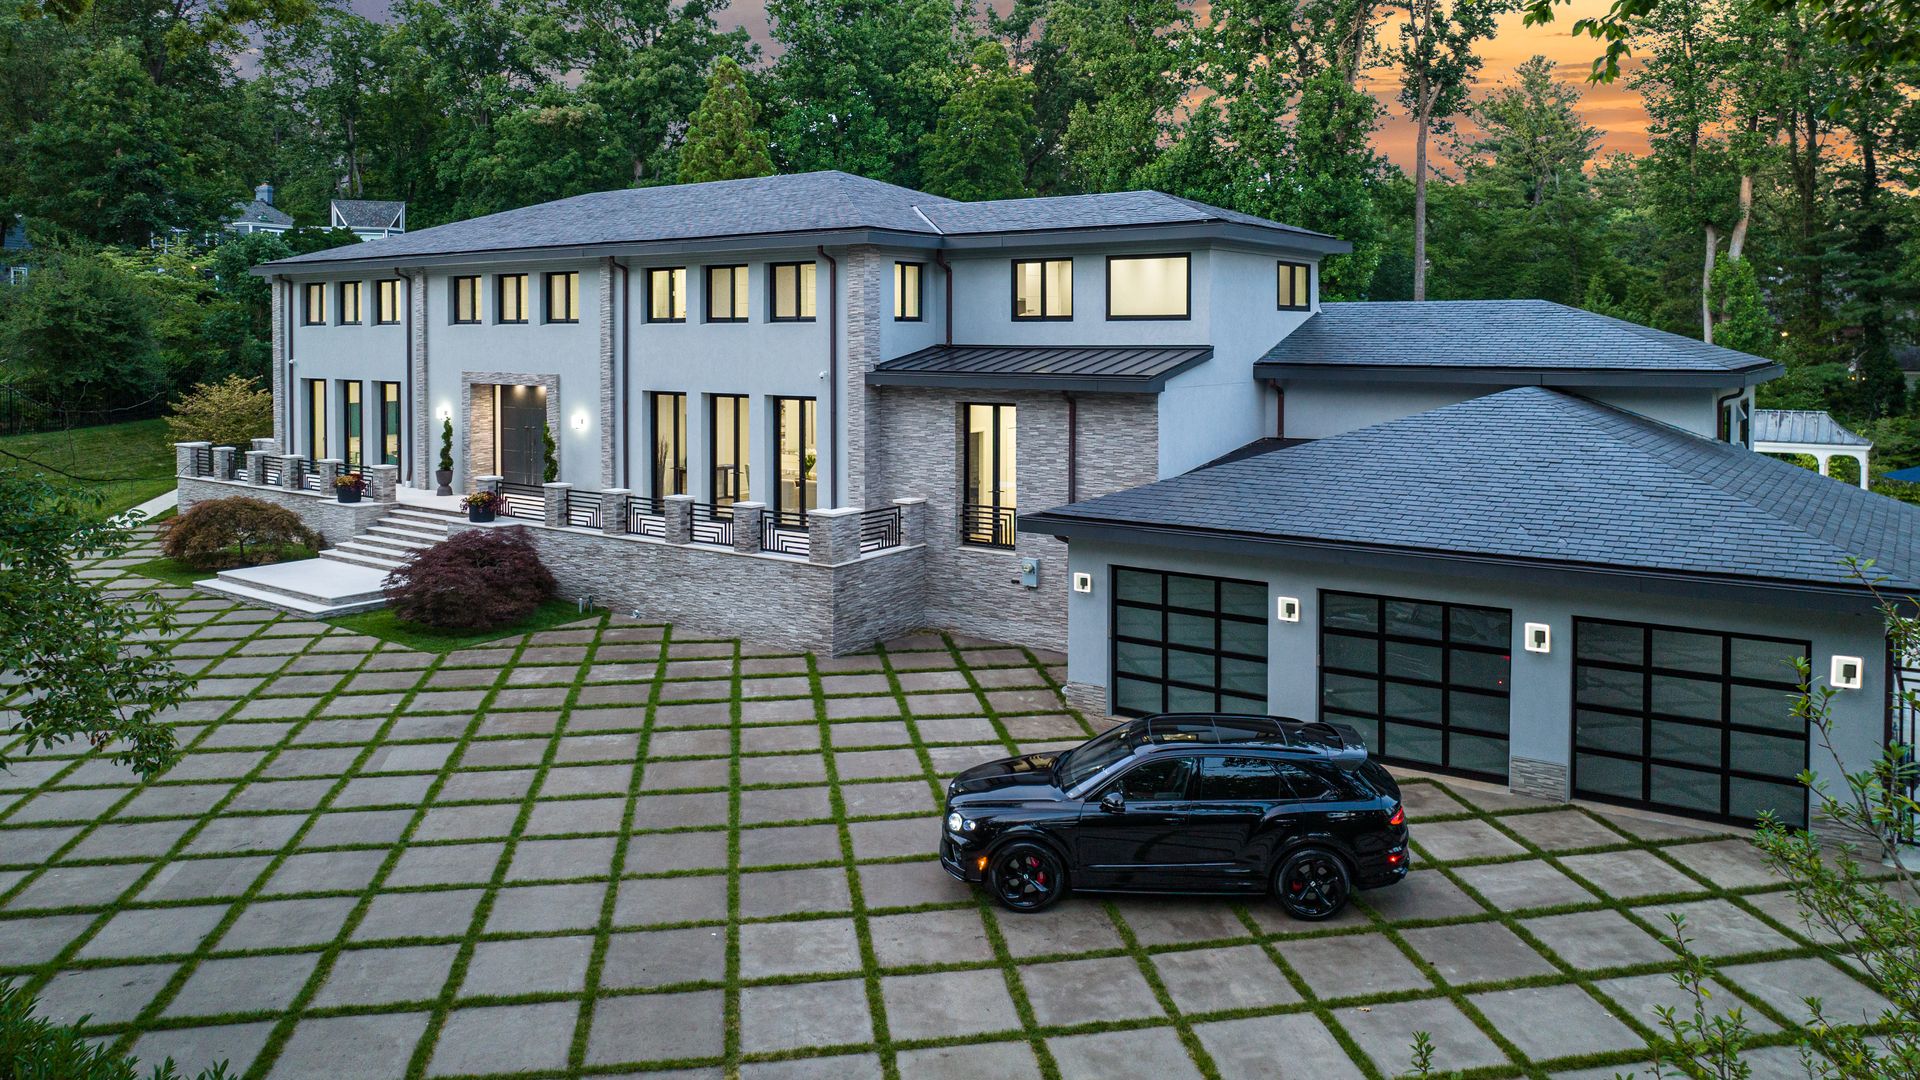 A sprawling white mansion, with a car parked out front.